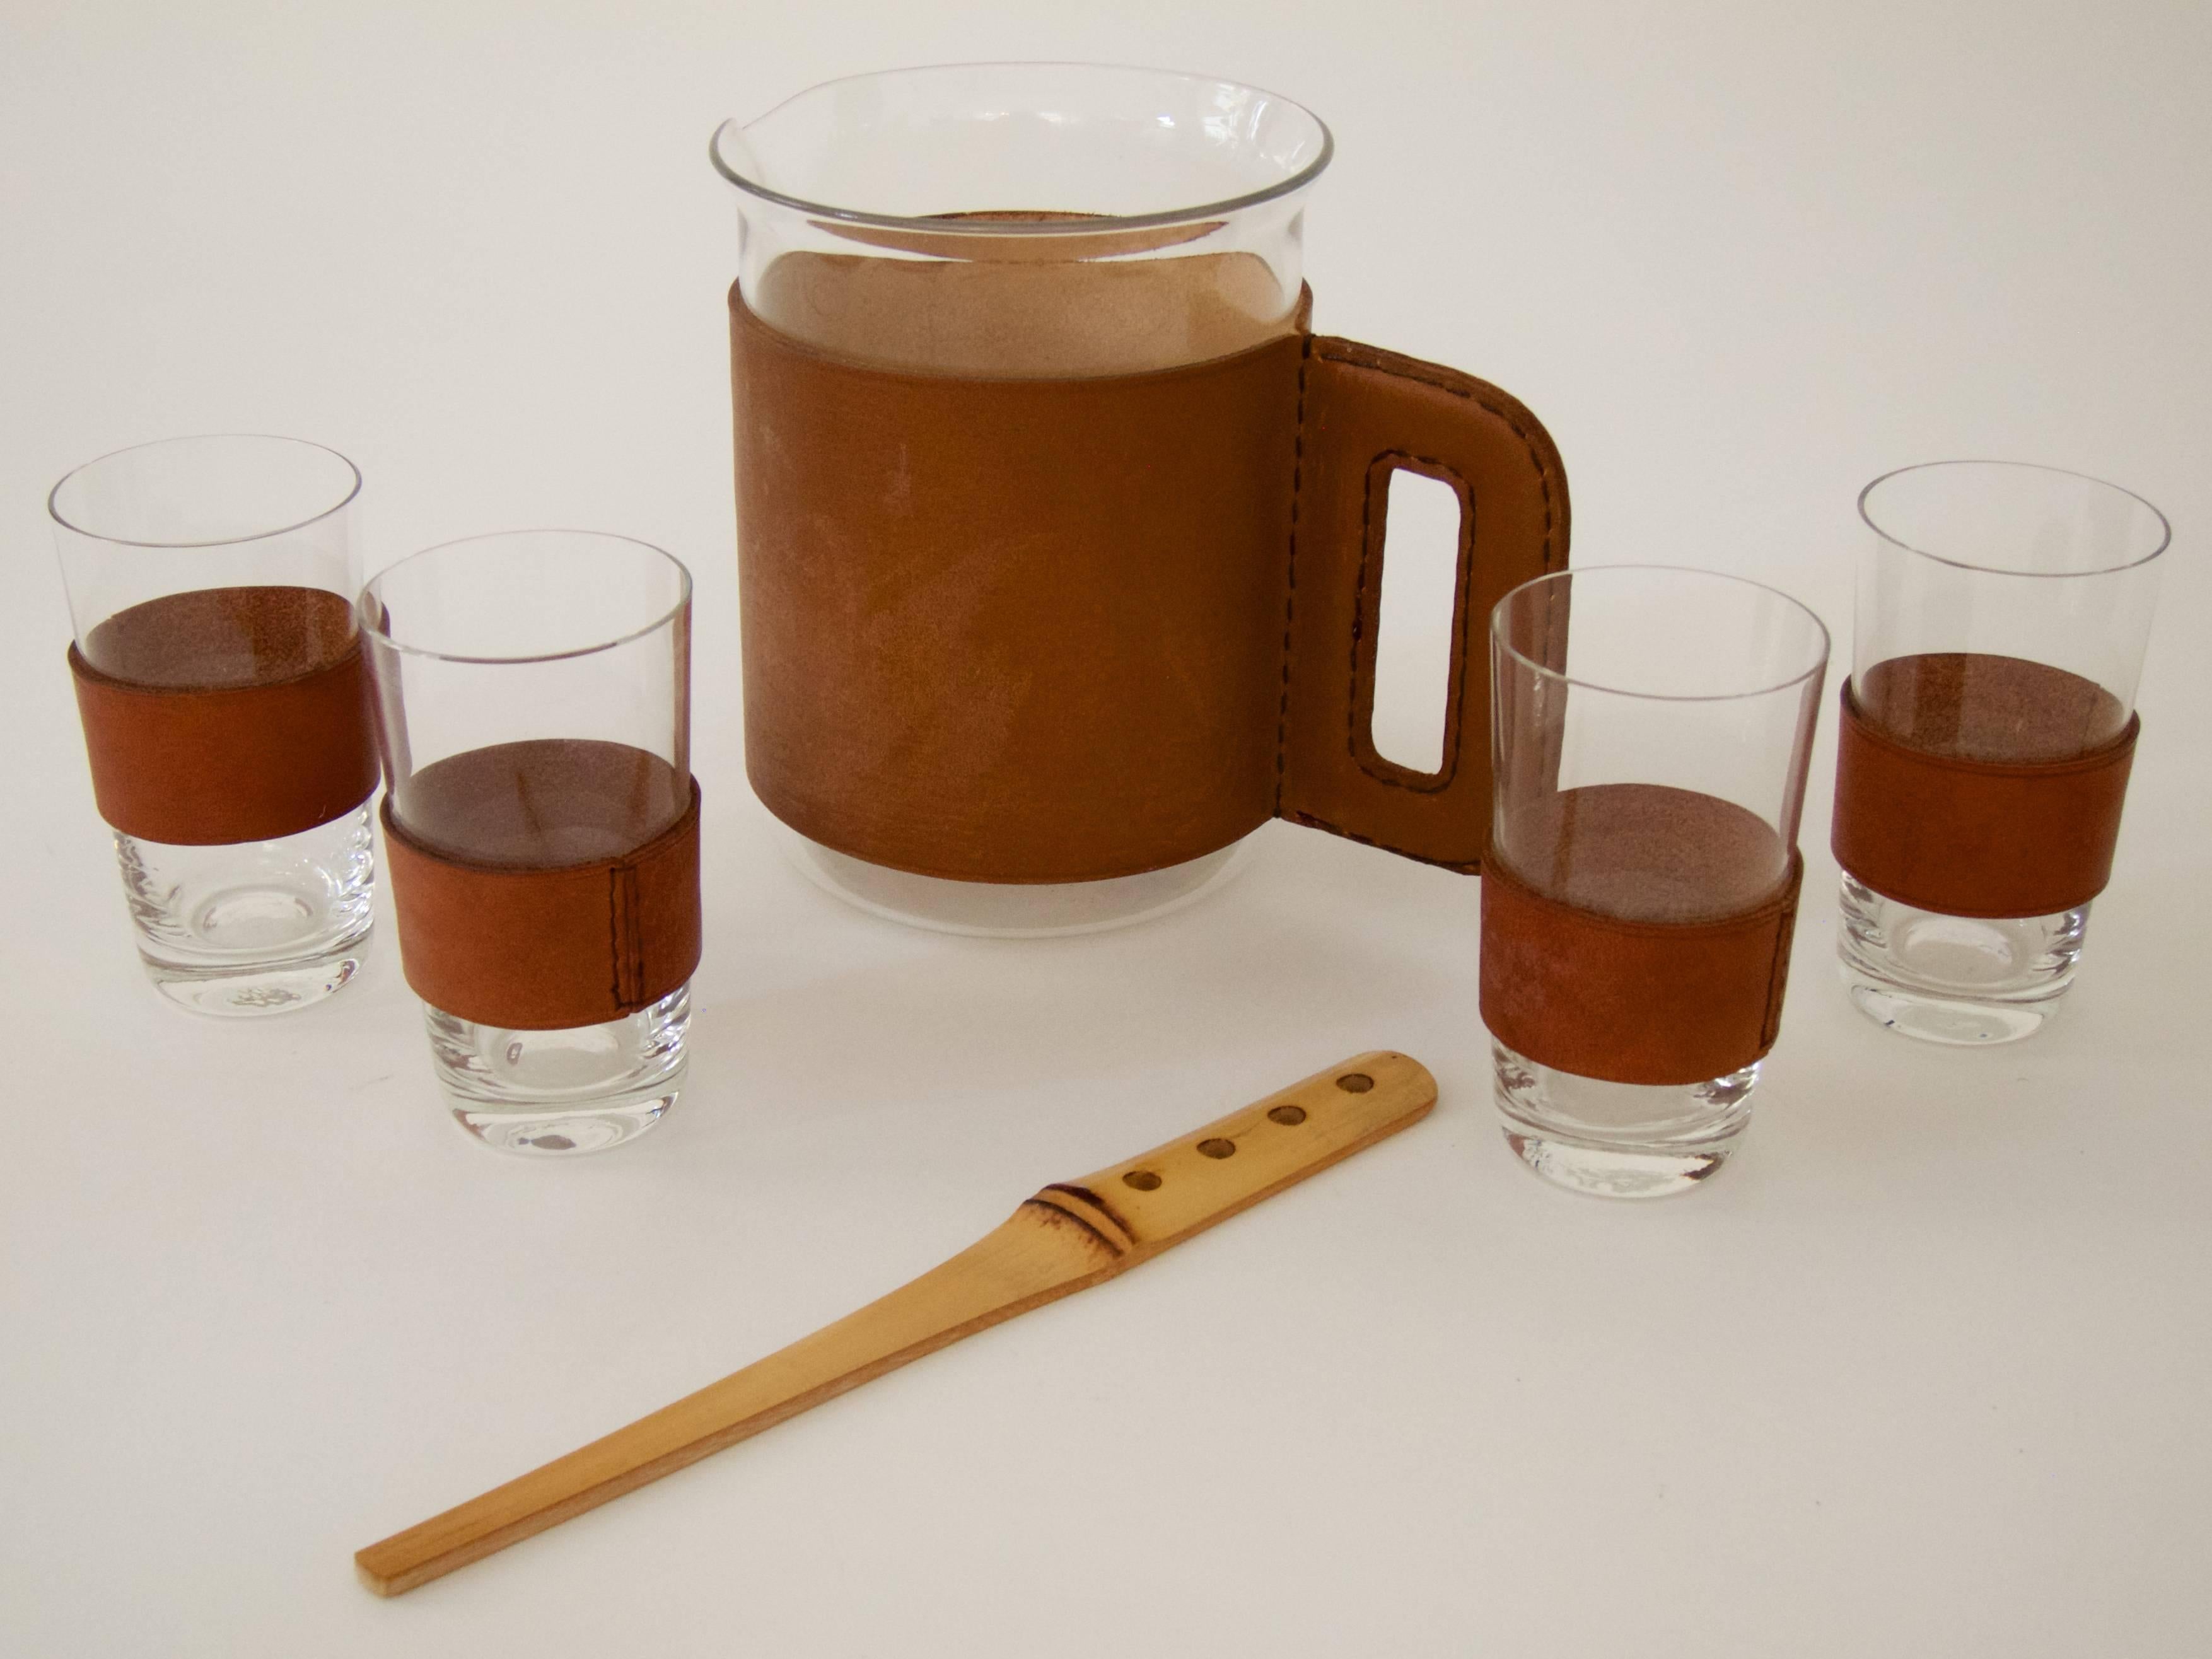 Austrian Pitcher with Four Glasses and a Bamboo Muddler